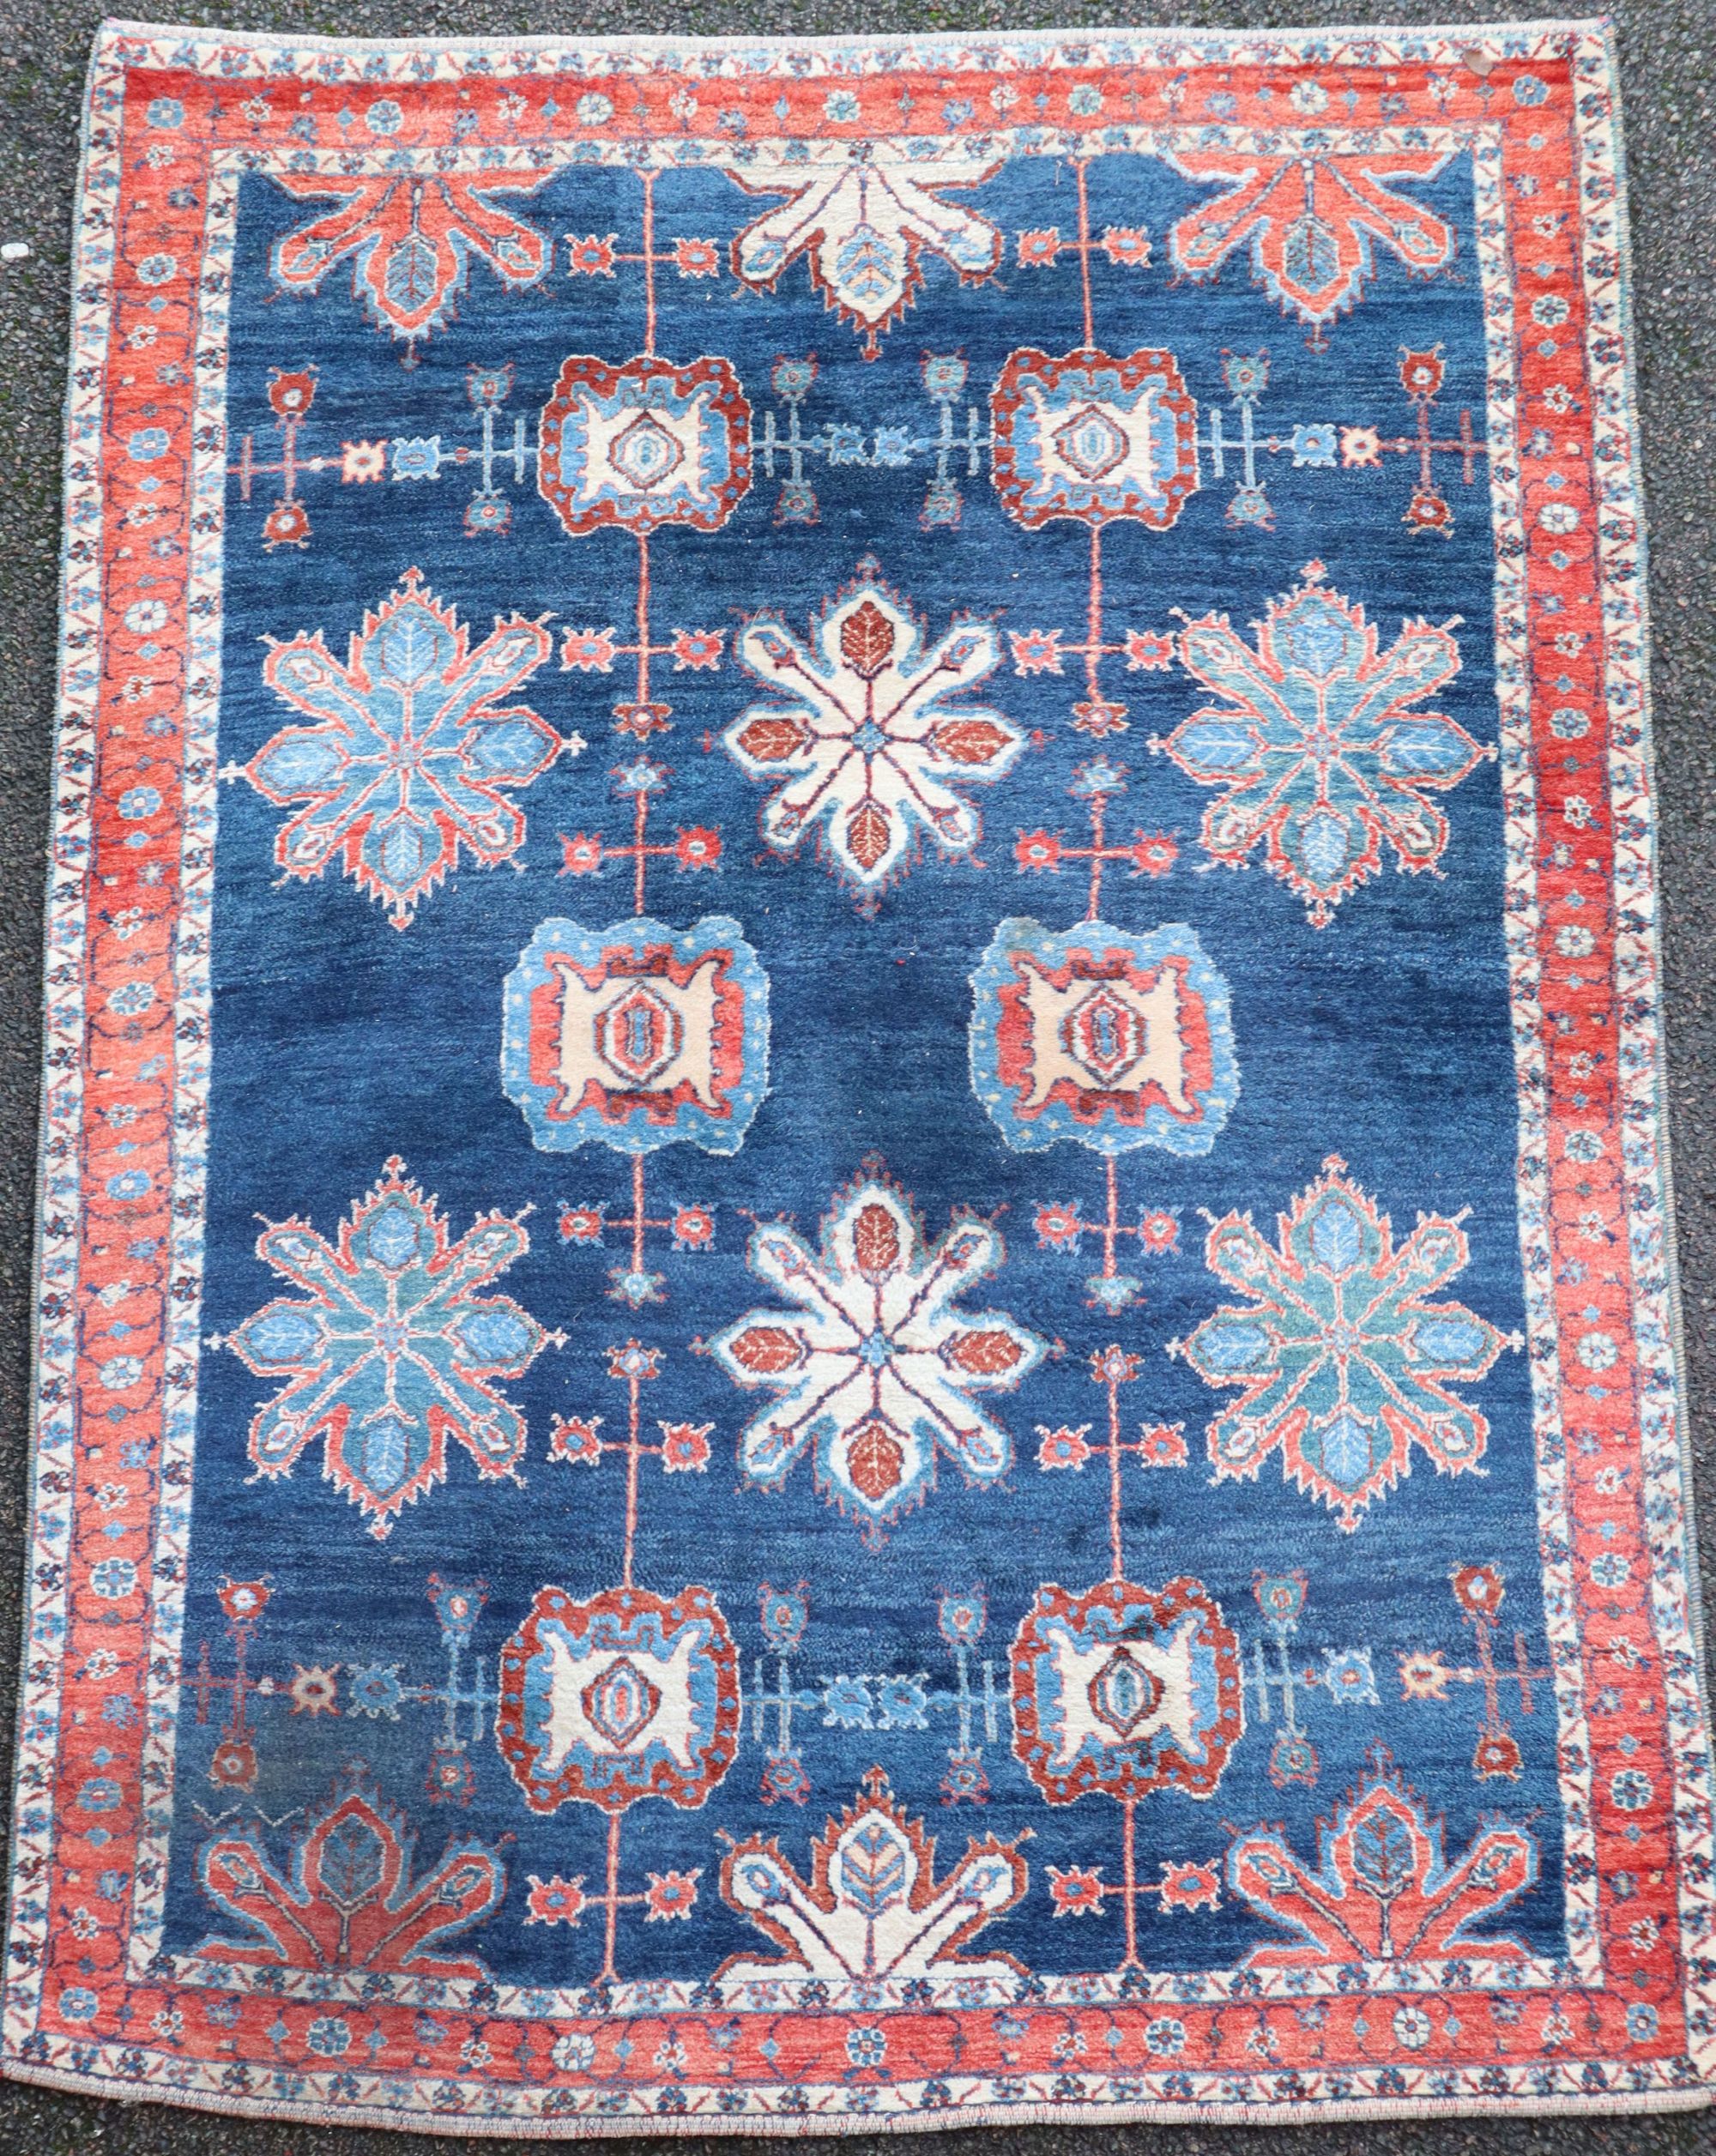 An Iranian Loribaft blue ground rug, 7ft 6in by 5ft 8in.